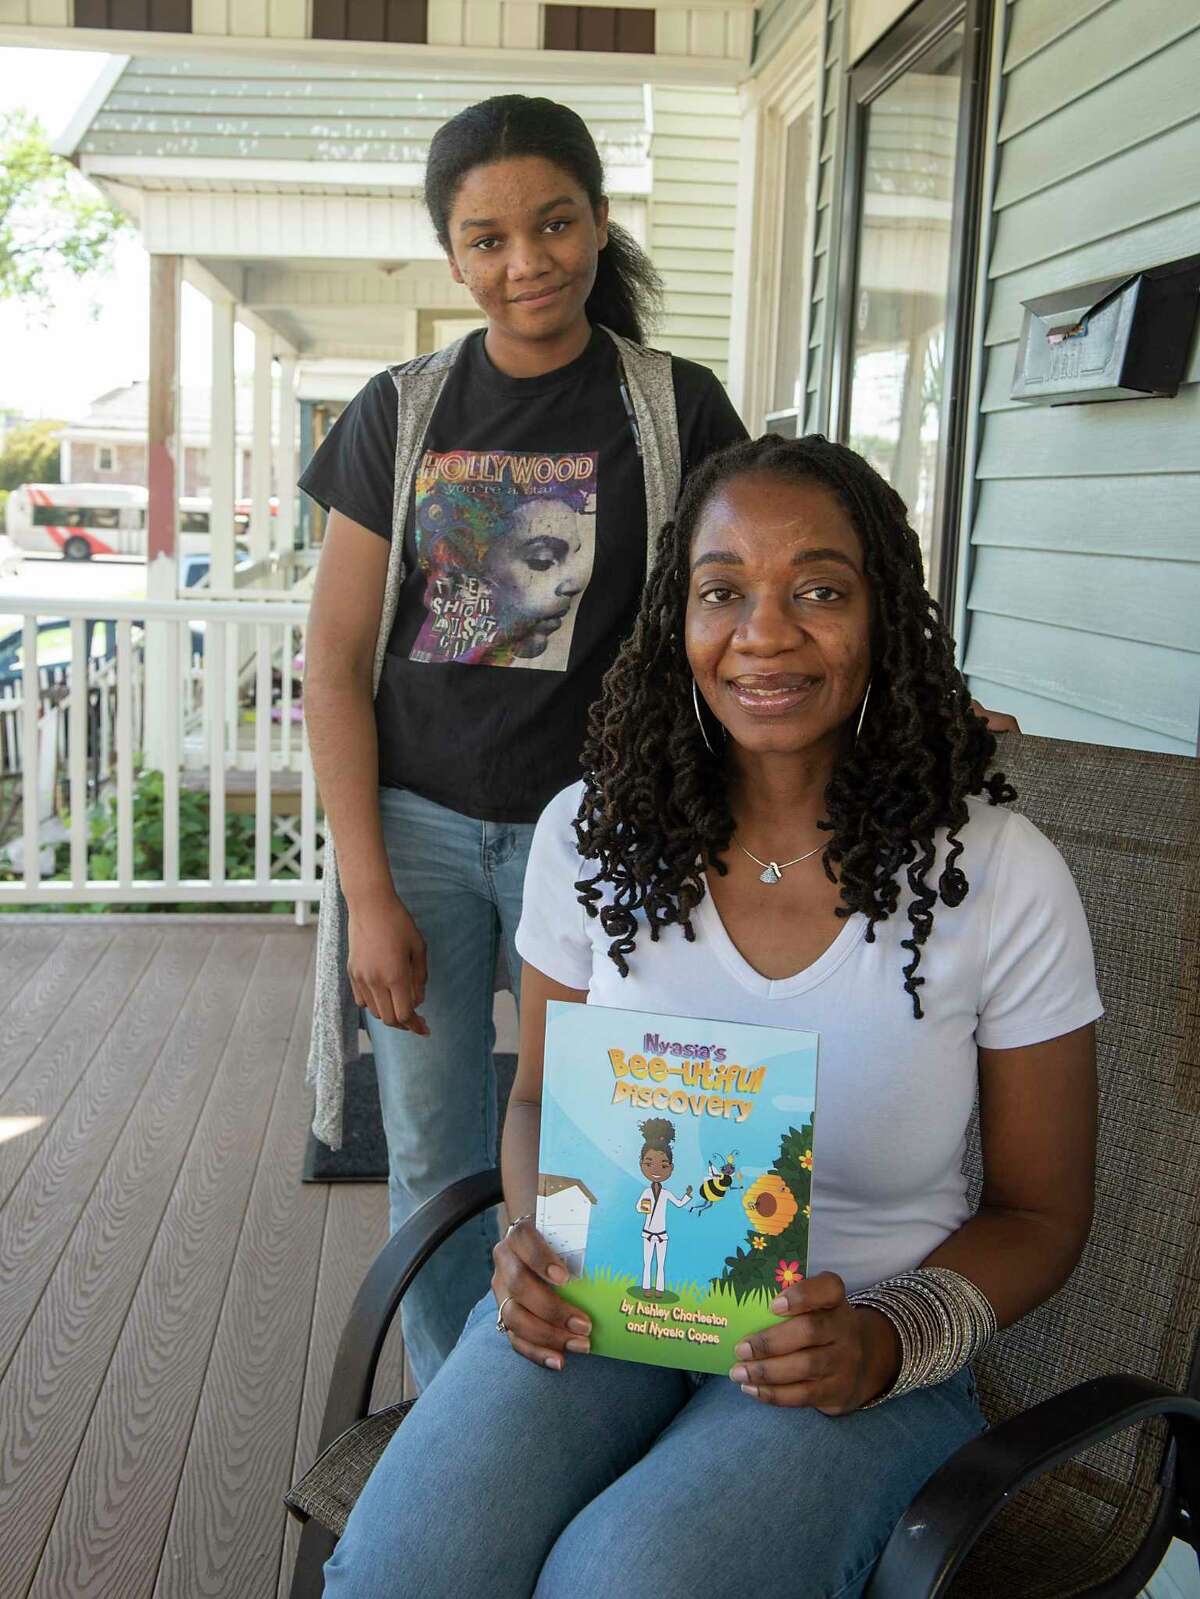 Ashley Charleston holds her book while sitting on her porch next to her niece Nyasia Copes on Thursday, June 10, 2021 in Schenectady, N.Y. Charleston is a self-published Schenectady-based children's book author who wrote a story Nyasia's Bee-utiful Discovery, about her niece, Nyasia. (Lori Van Buren/Times Union)